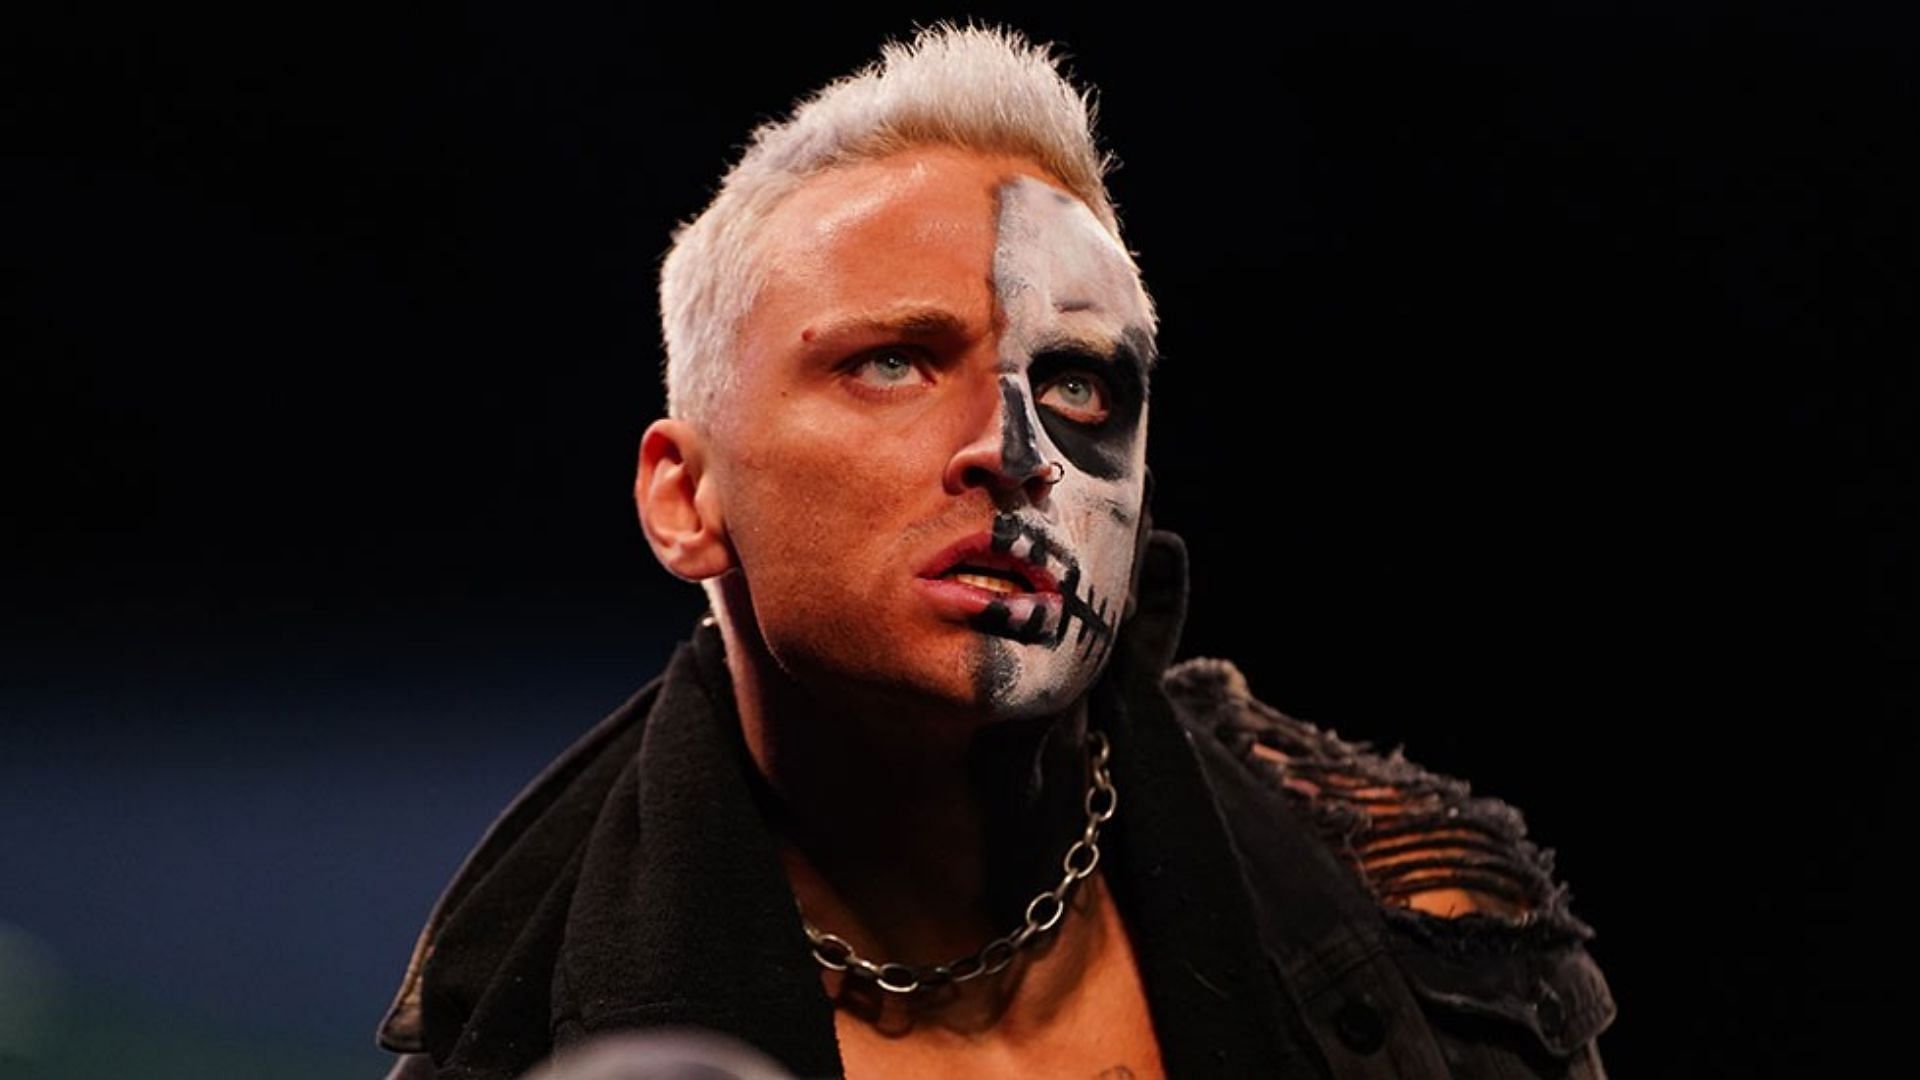 Will Darby Allin continue his tattoo journey after this elaborate piece?